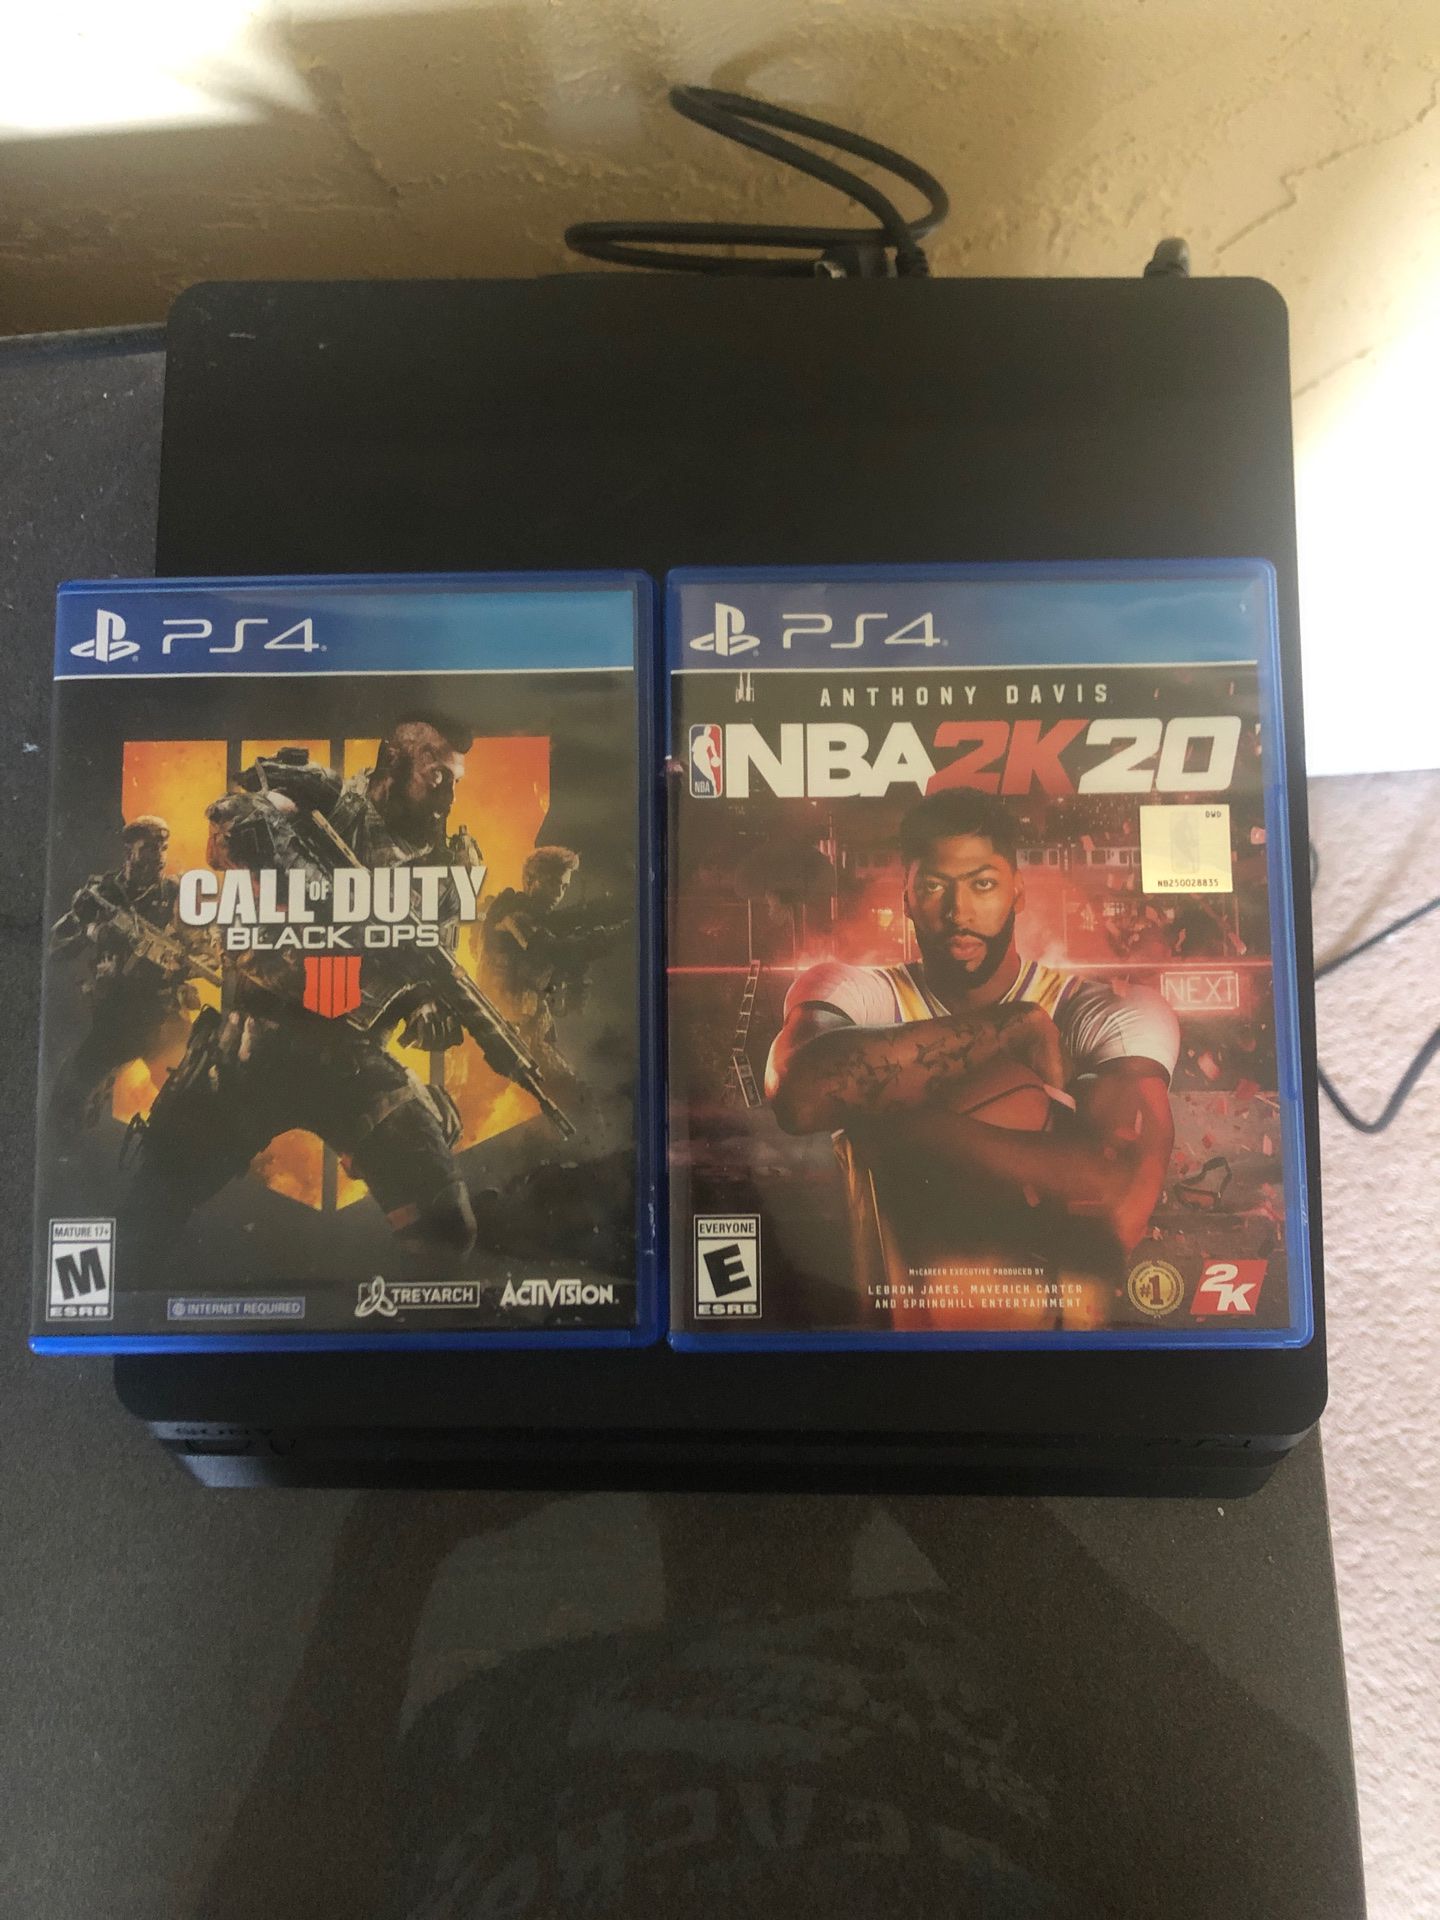 Ps4 Call of Duty and 2k20